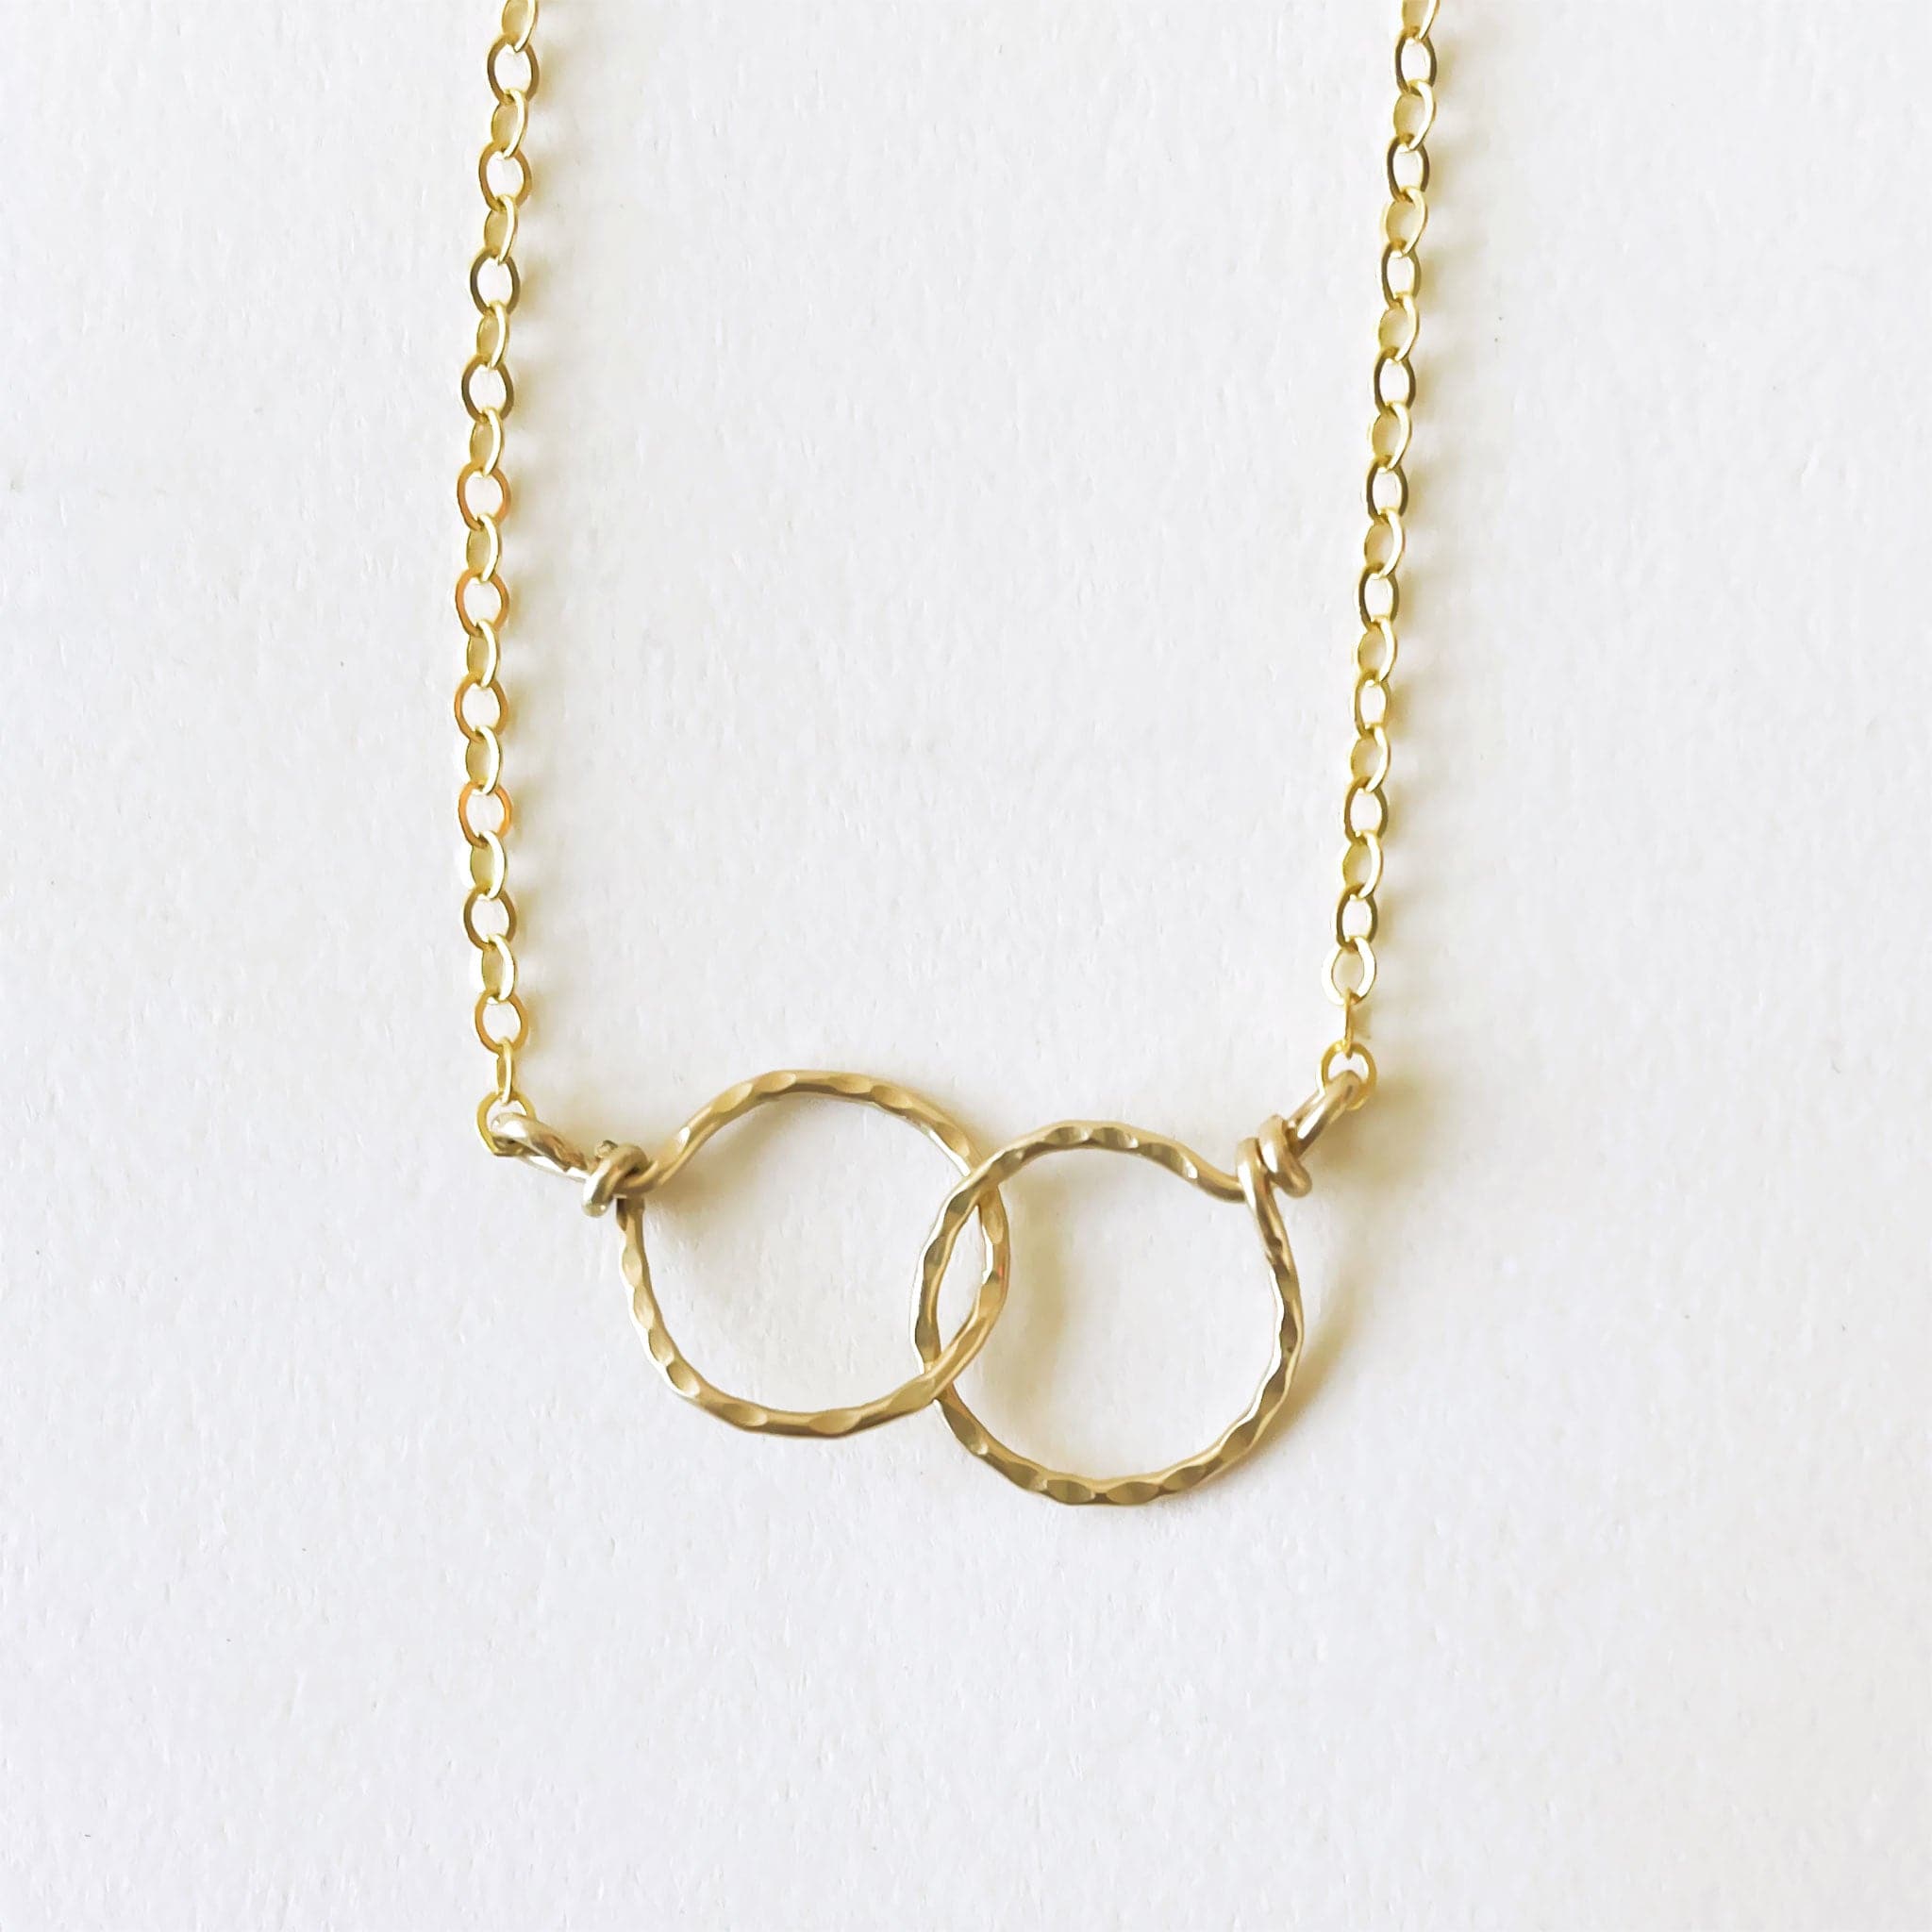 Two hammered 14k gold circles interlocked on a 16" chain.